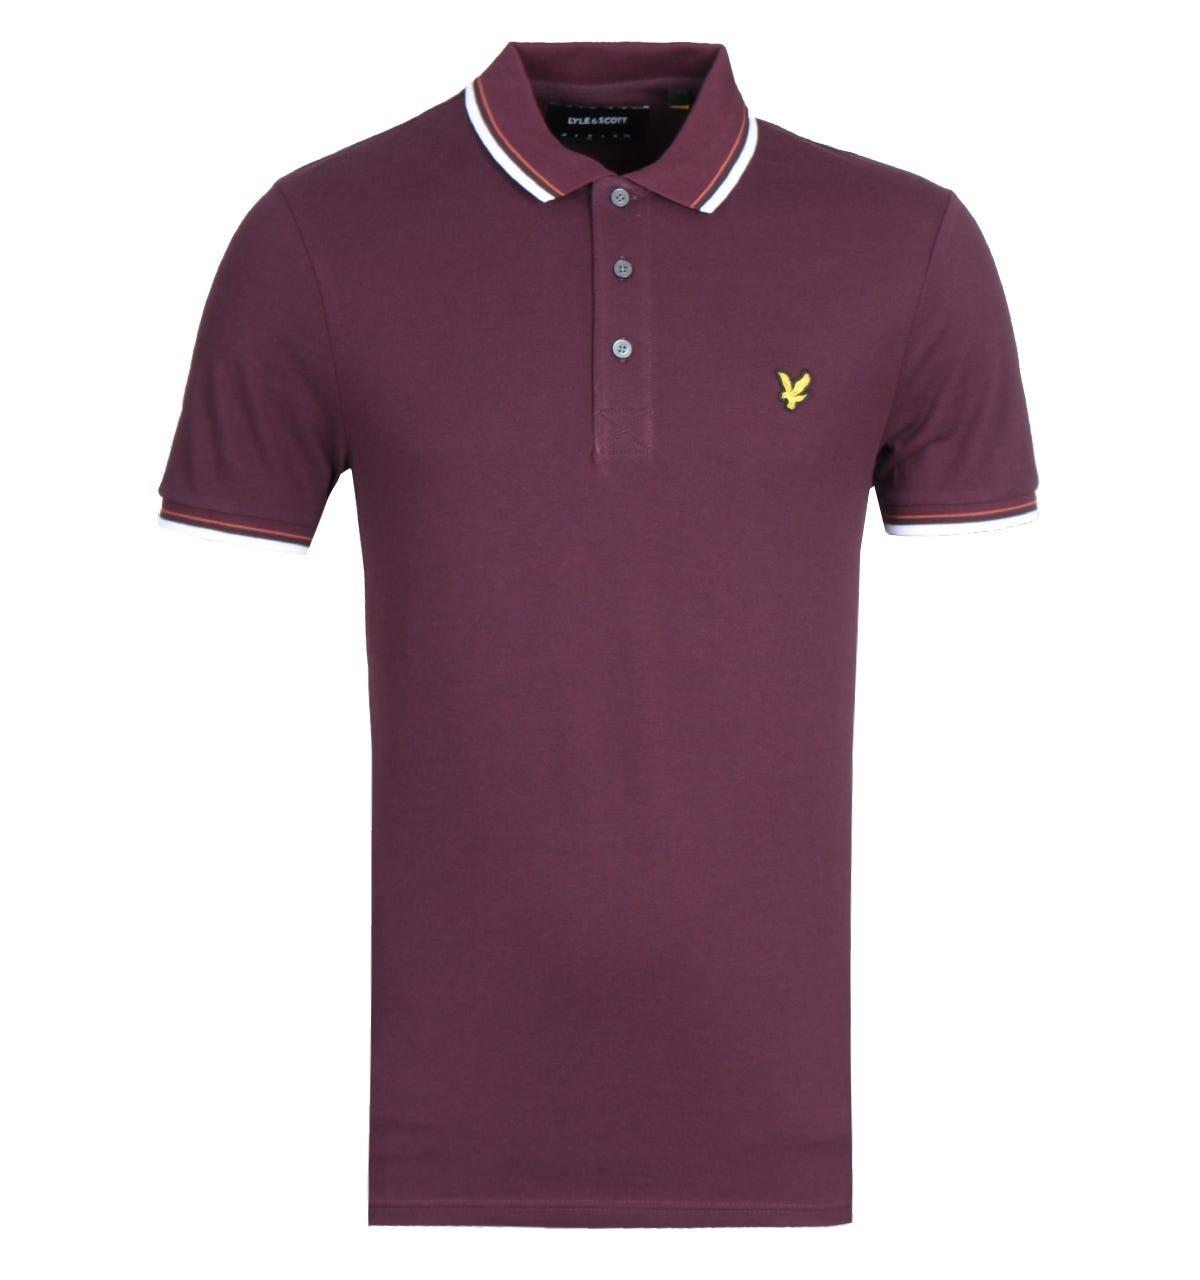 Lyle & Scott Cotton Tipped Burgundy Polo Shirt in Purple for Men - Lyst